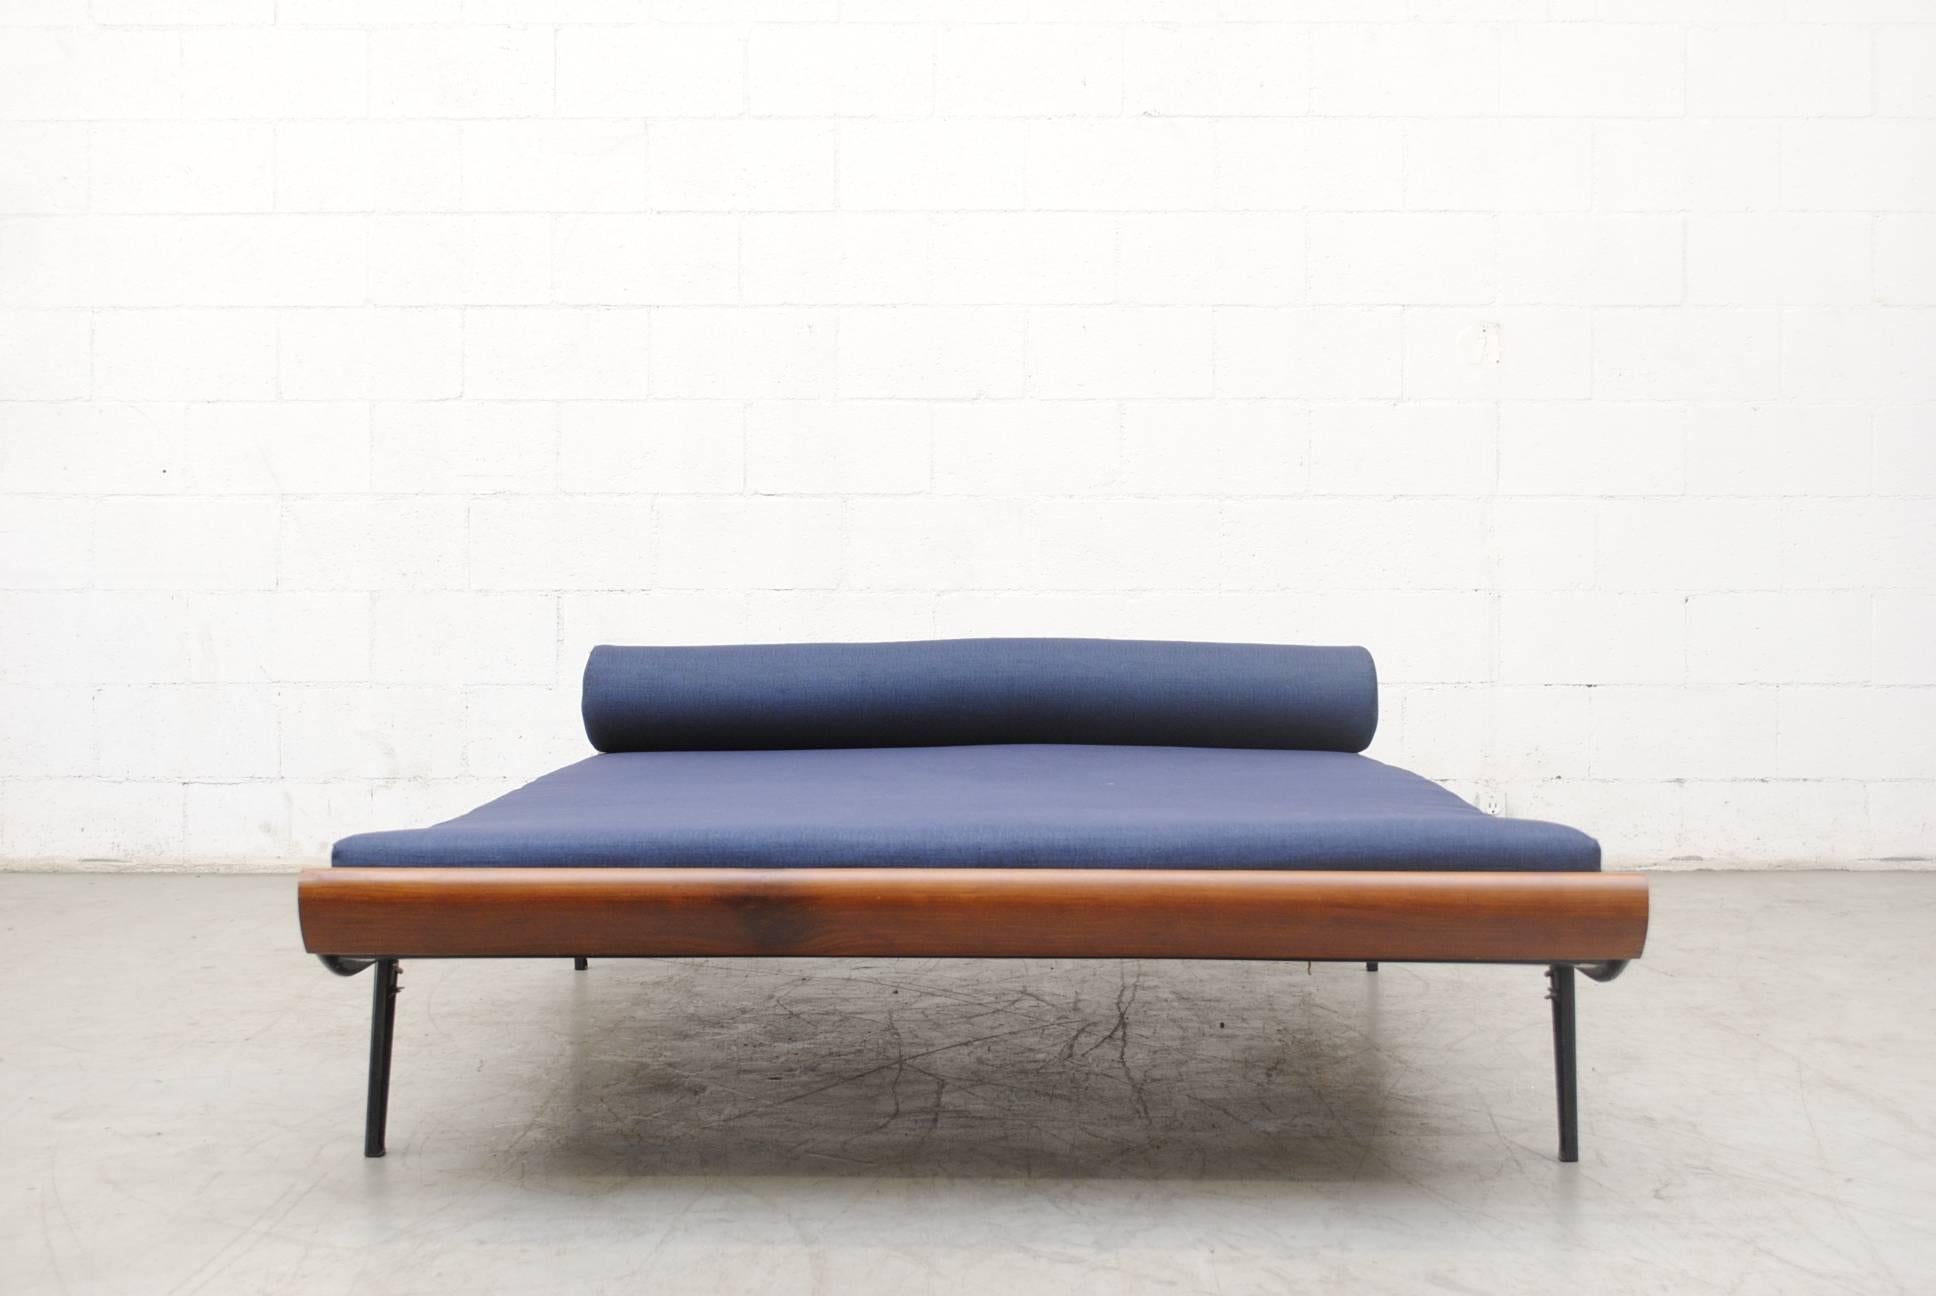 Super wide Cleopatra daybed by A.R. Cordemeyer for Auping, 1960s with teak ends and charcoal enameled metal frame with 